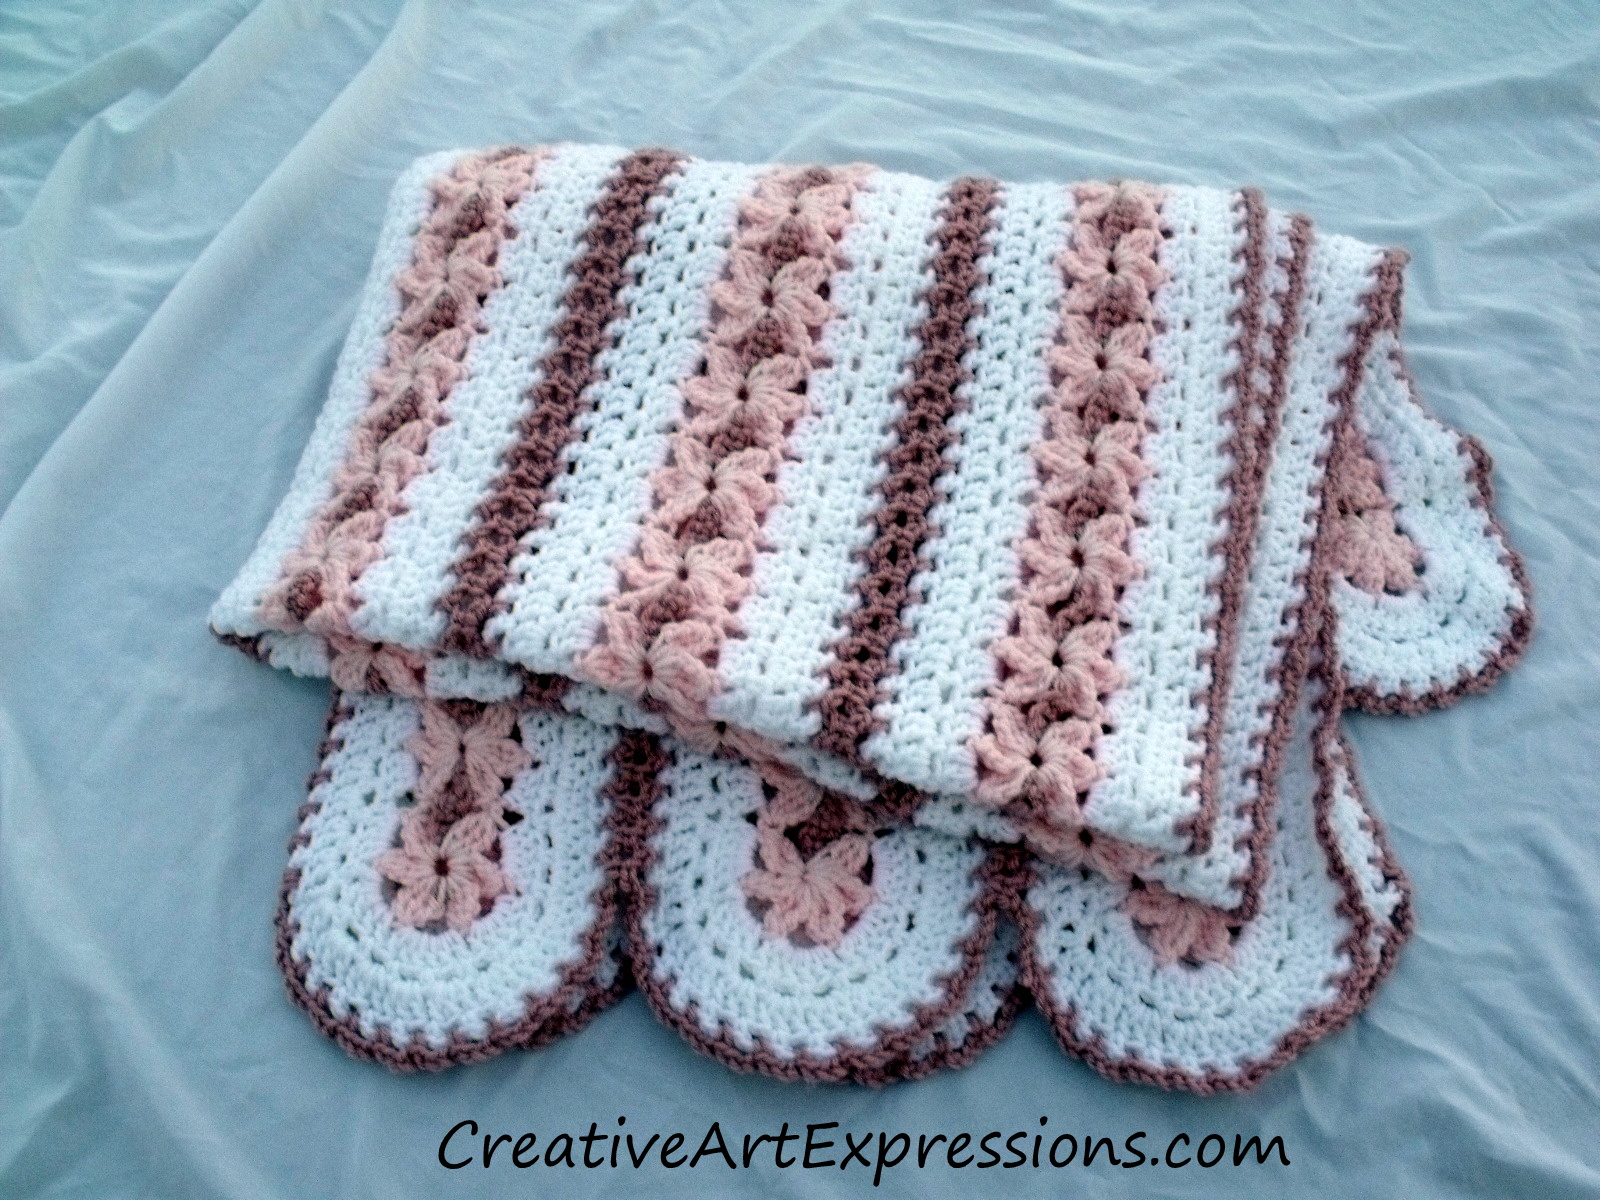 Creative Art Expressions Hand Crocheted Pink & White Baby Blanket